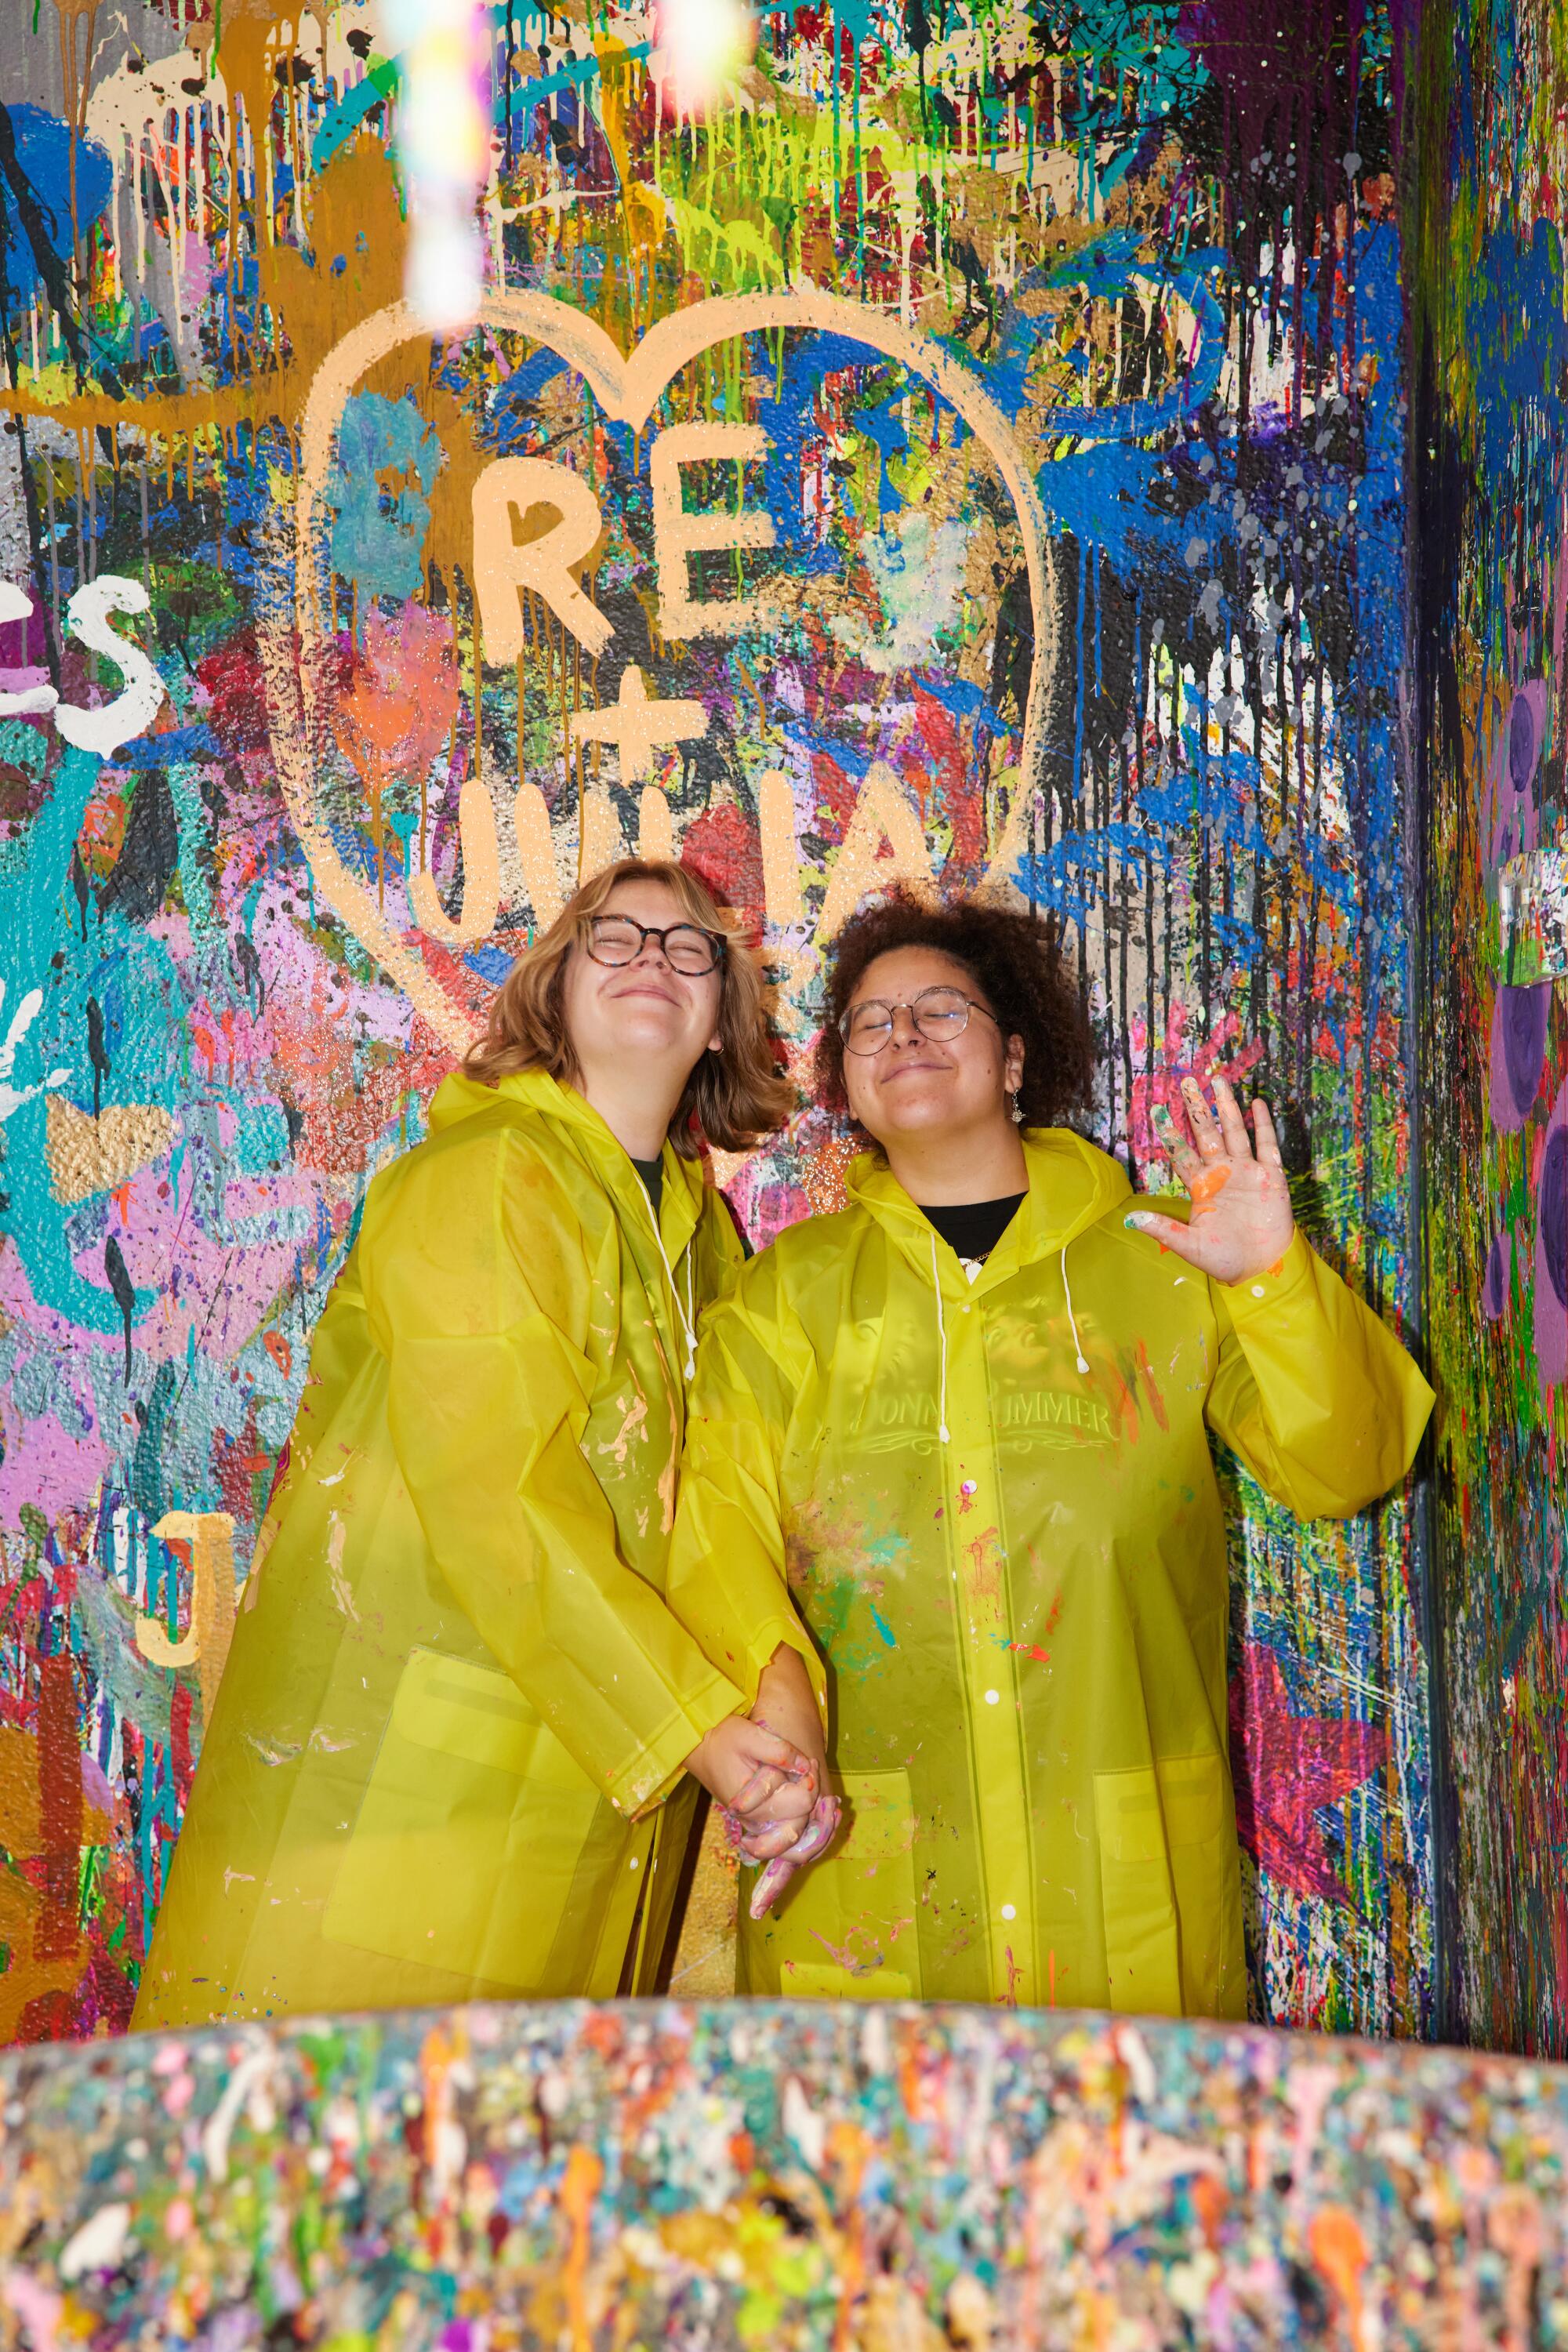 Two people wearing yellow raincoats pose in front of a heart painted onto the multicolor wall.